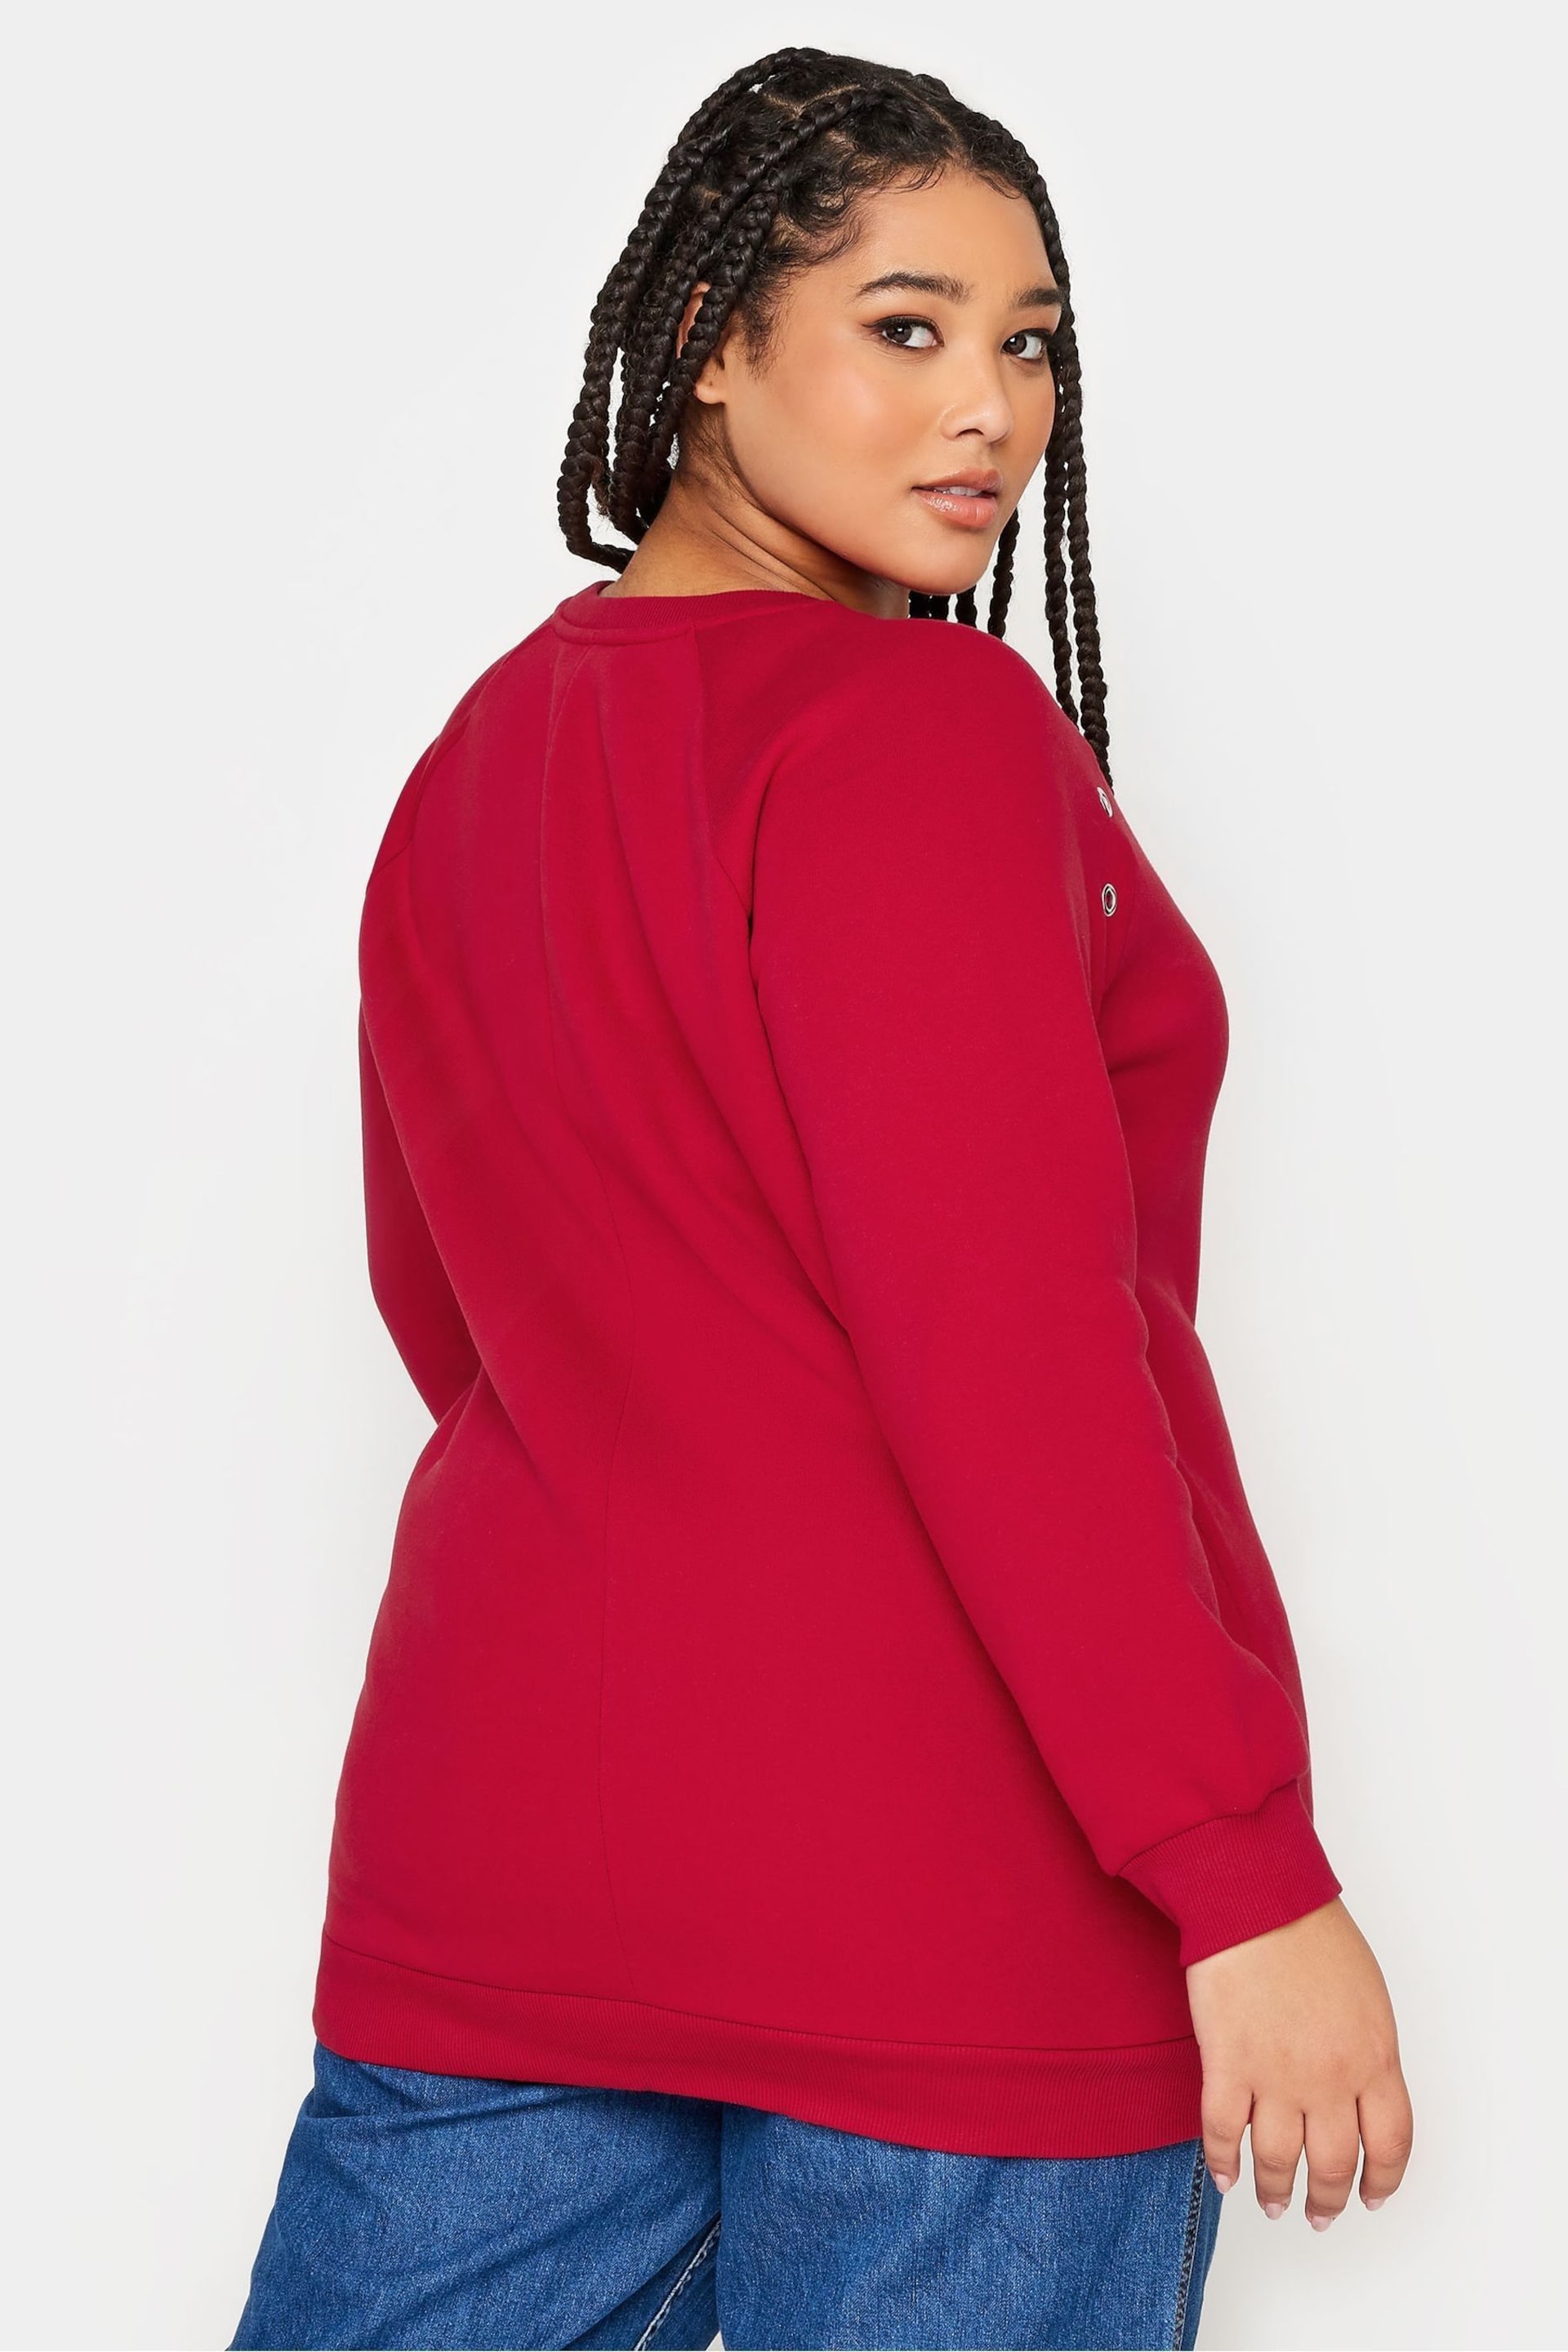 Yours Curve Red Eyelet Detailed Sweatshirt - Image 3 of 4